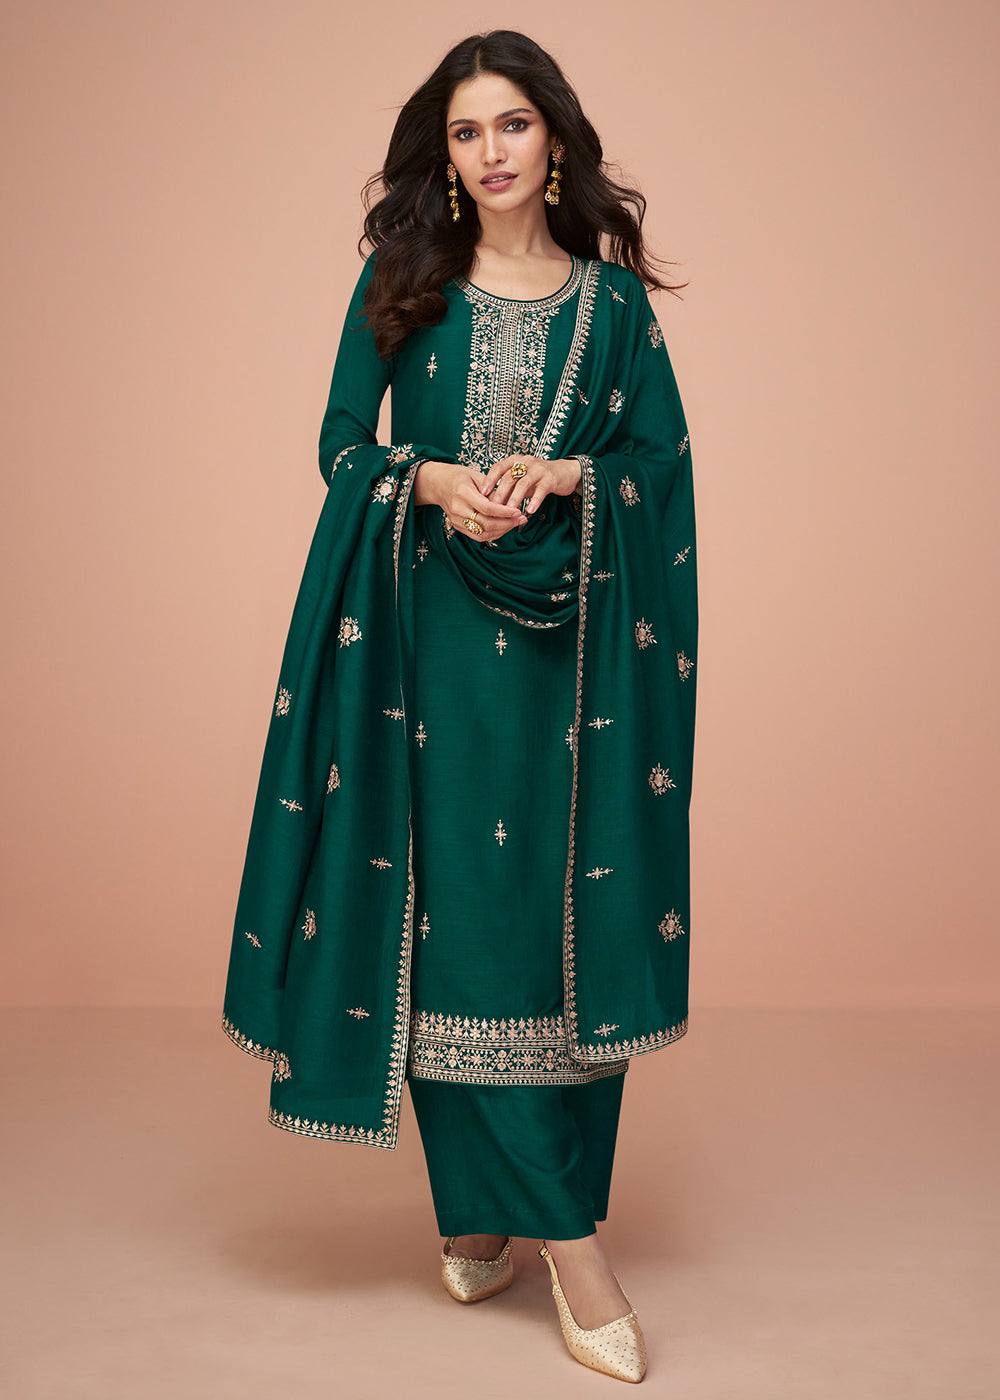 Buy Now Tempting Green Silk Embroidered Palazzo Salwar Suit Online in USA, UK, Canada, Germany, Australia & Worldwide at Empress Clothing. 